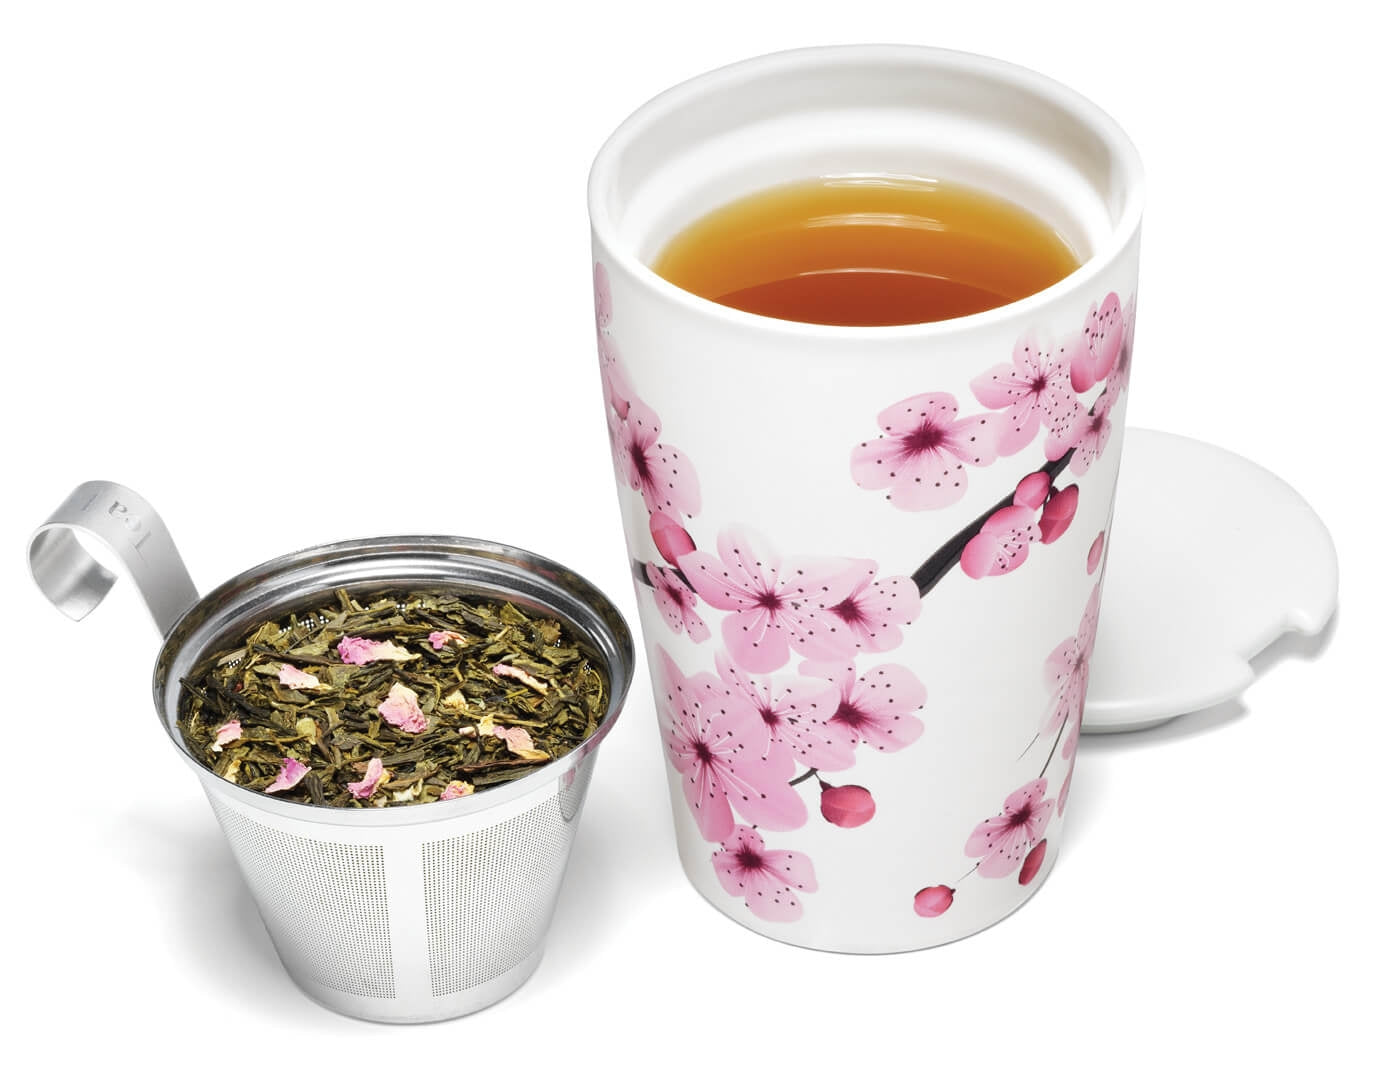 Hanami design KATI® Steeping cup with infuser showing stainless steel infuser with tea leaves